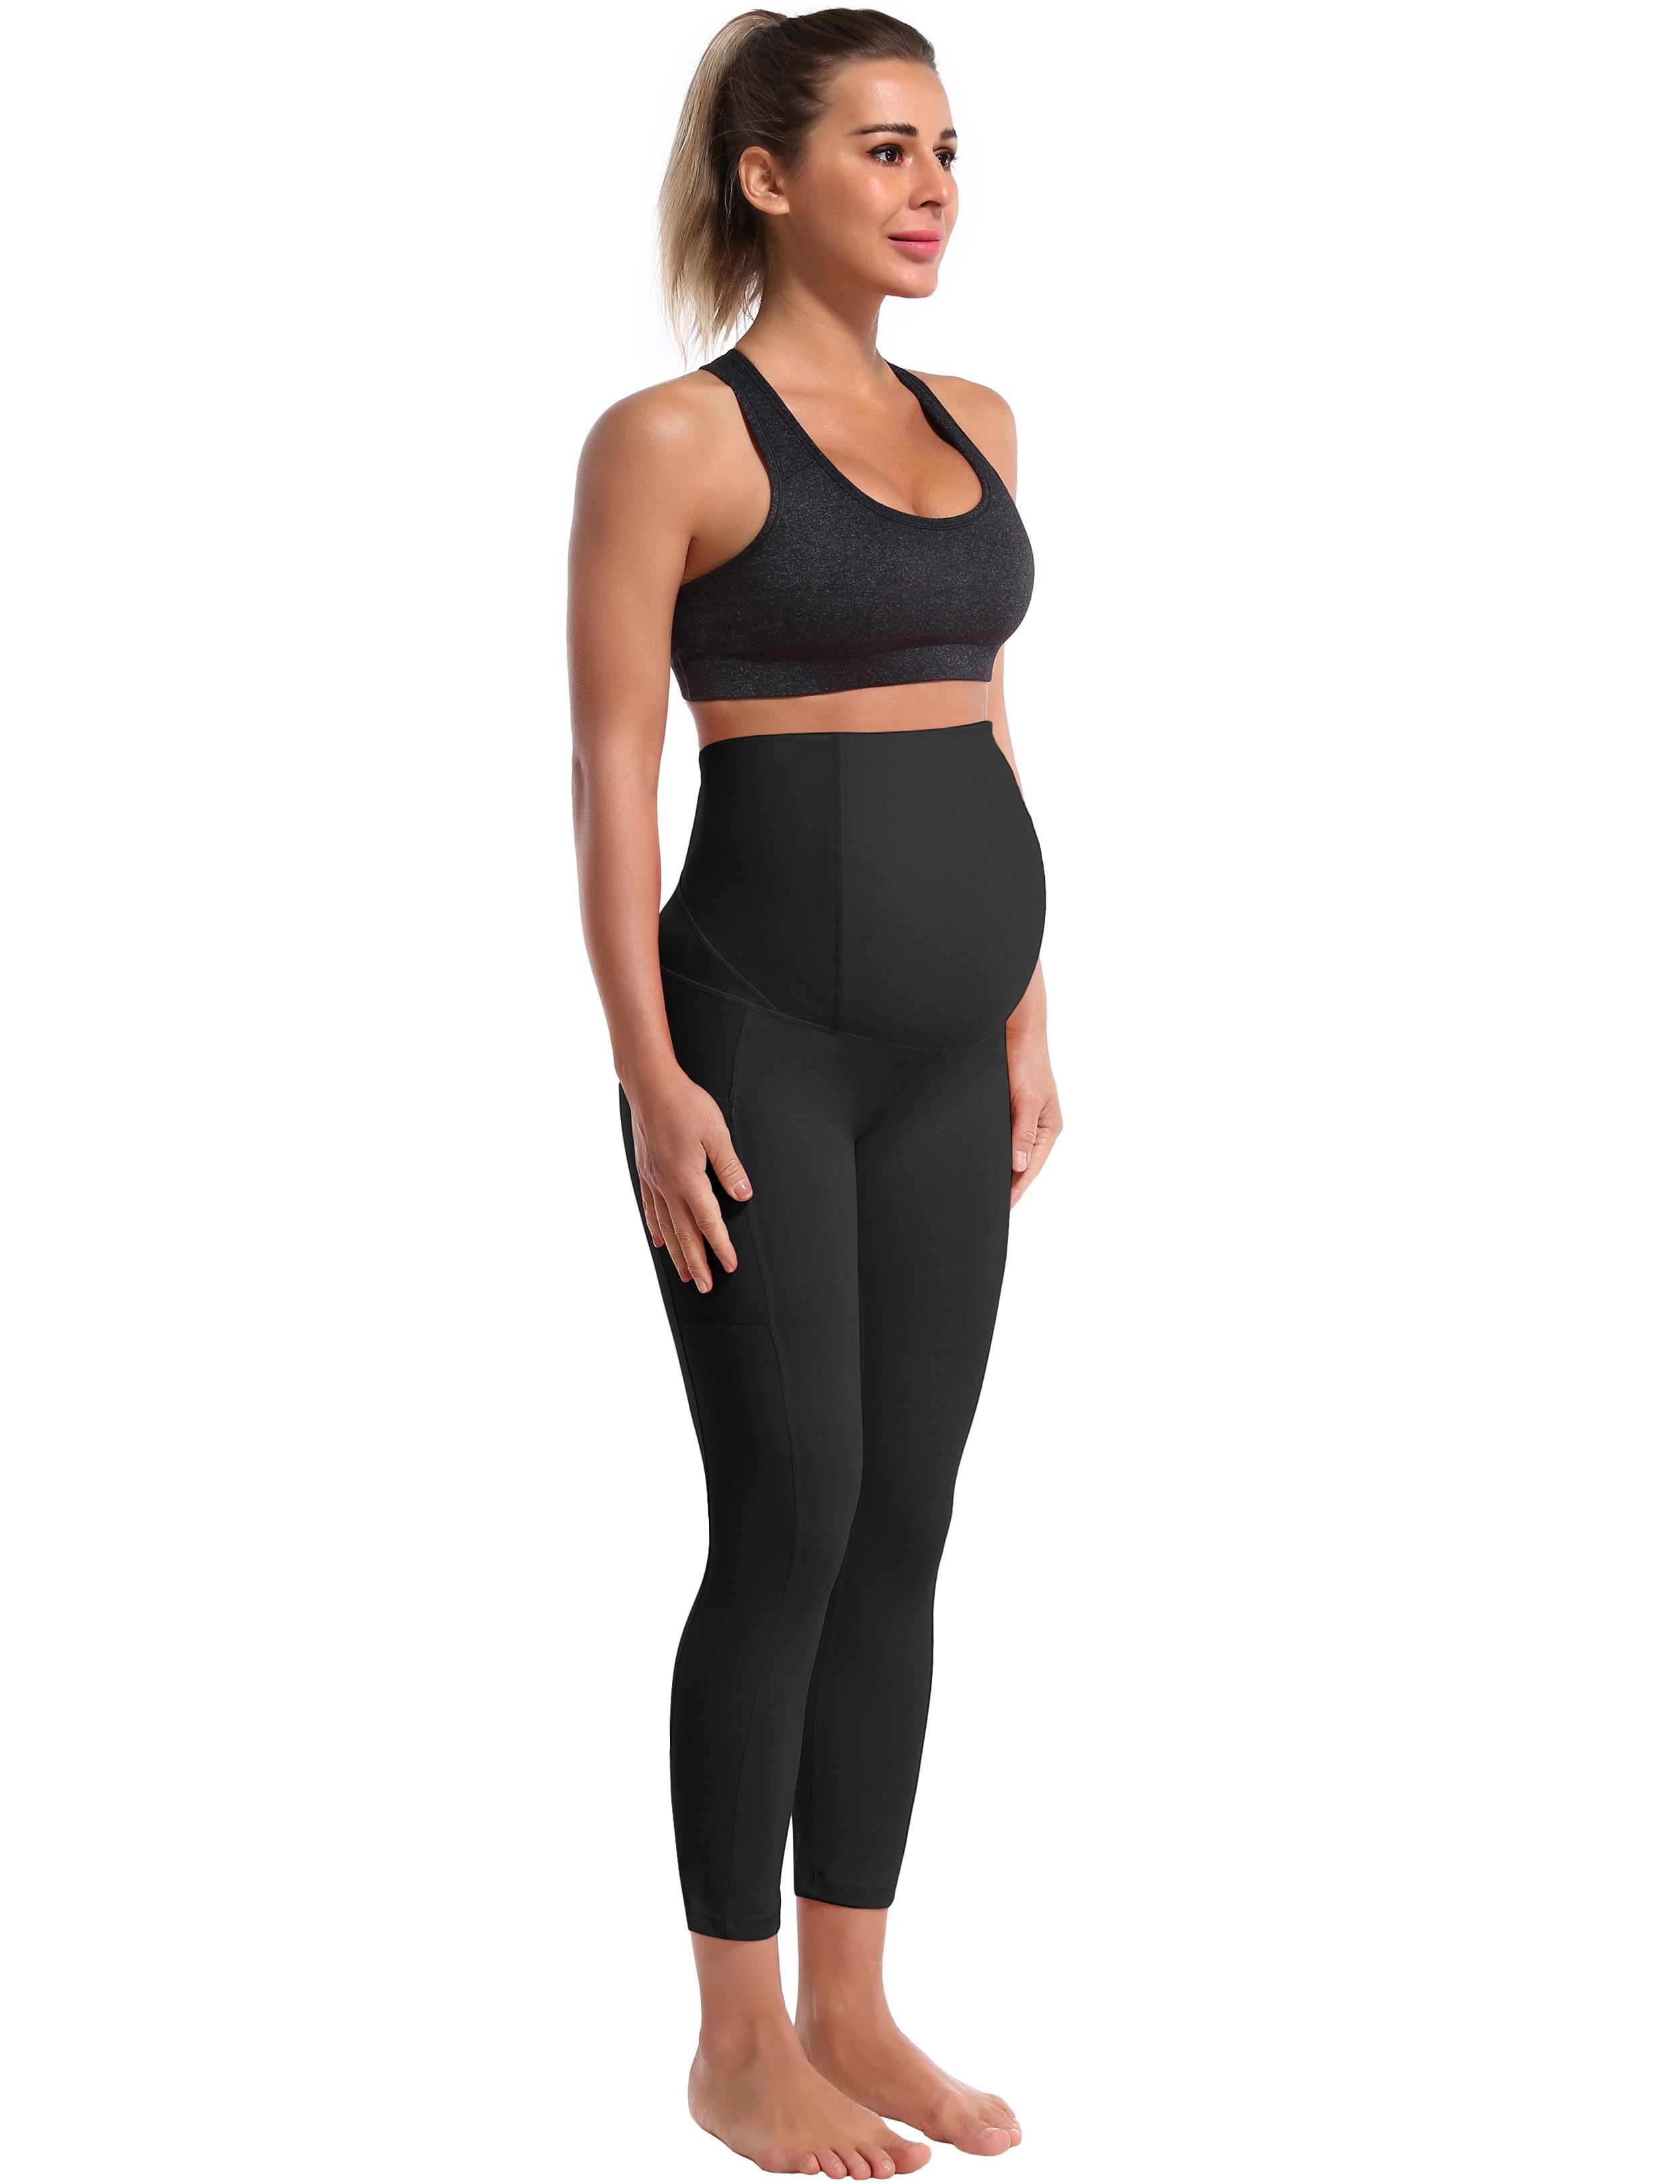 22" Side Pockets Maternity Jogging Pants black 87%Nylon/13%Spandex Softest-ever fabric High elasticity 4-way stretch Fabric doesn't attract lint easily No see-through Moisture-wicking Machine wash